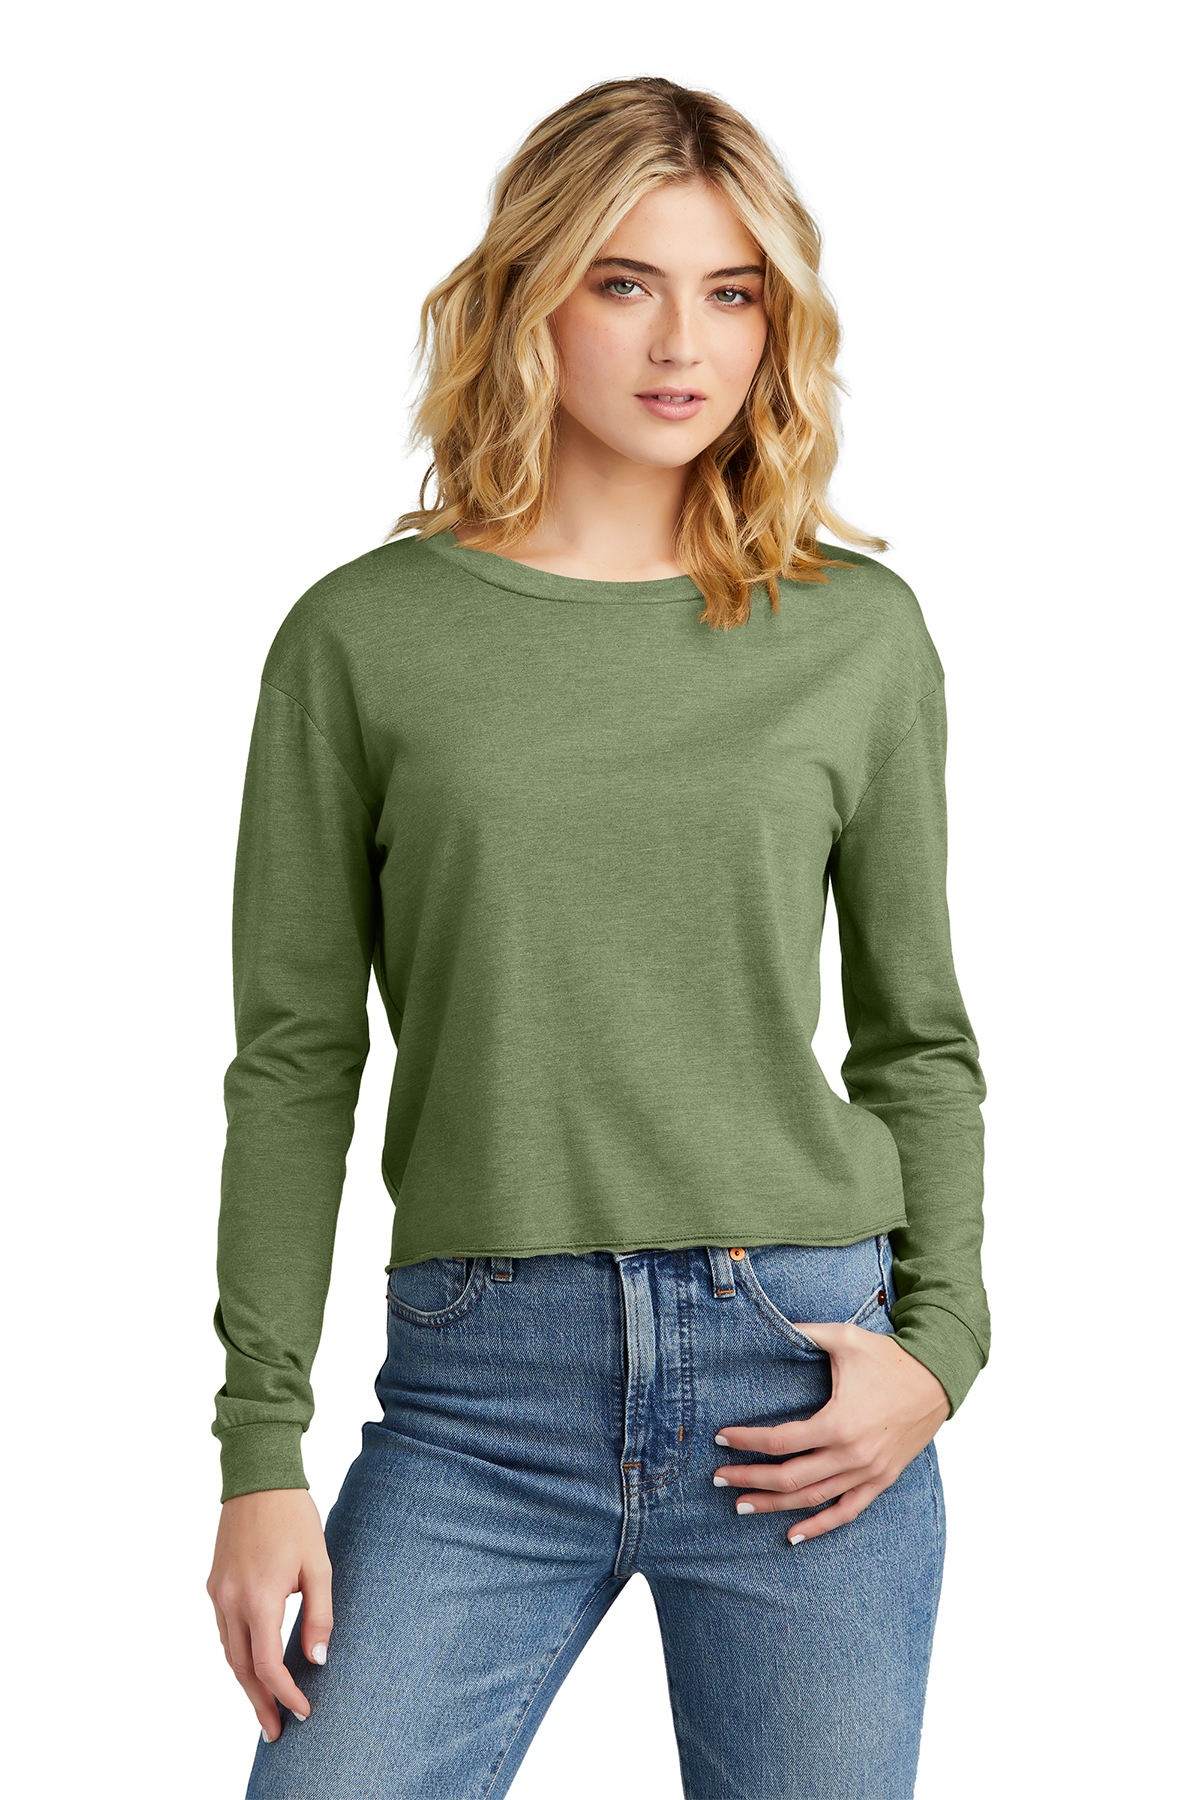 click to view Military Green Frost